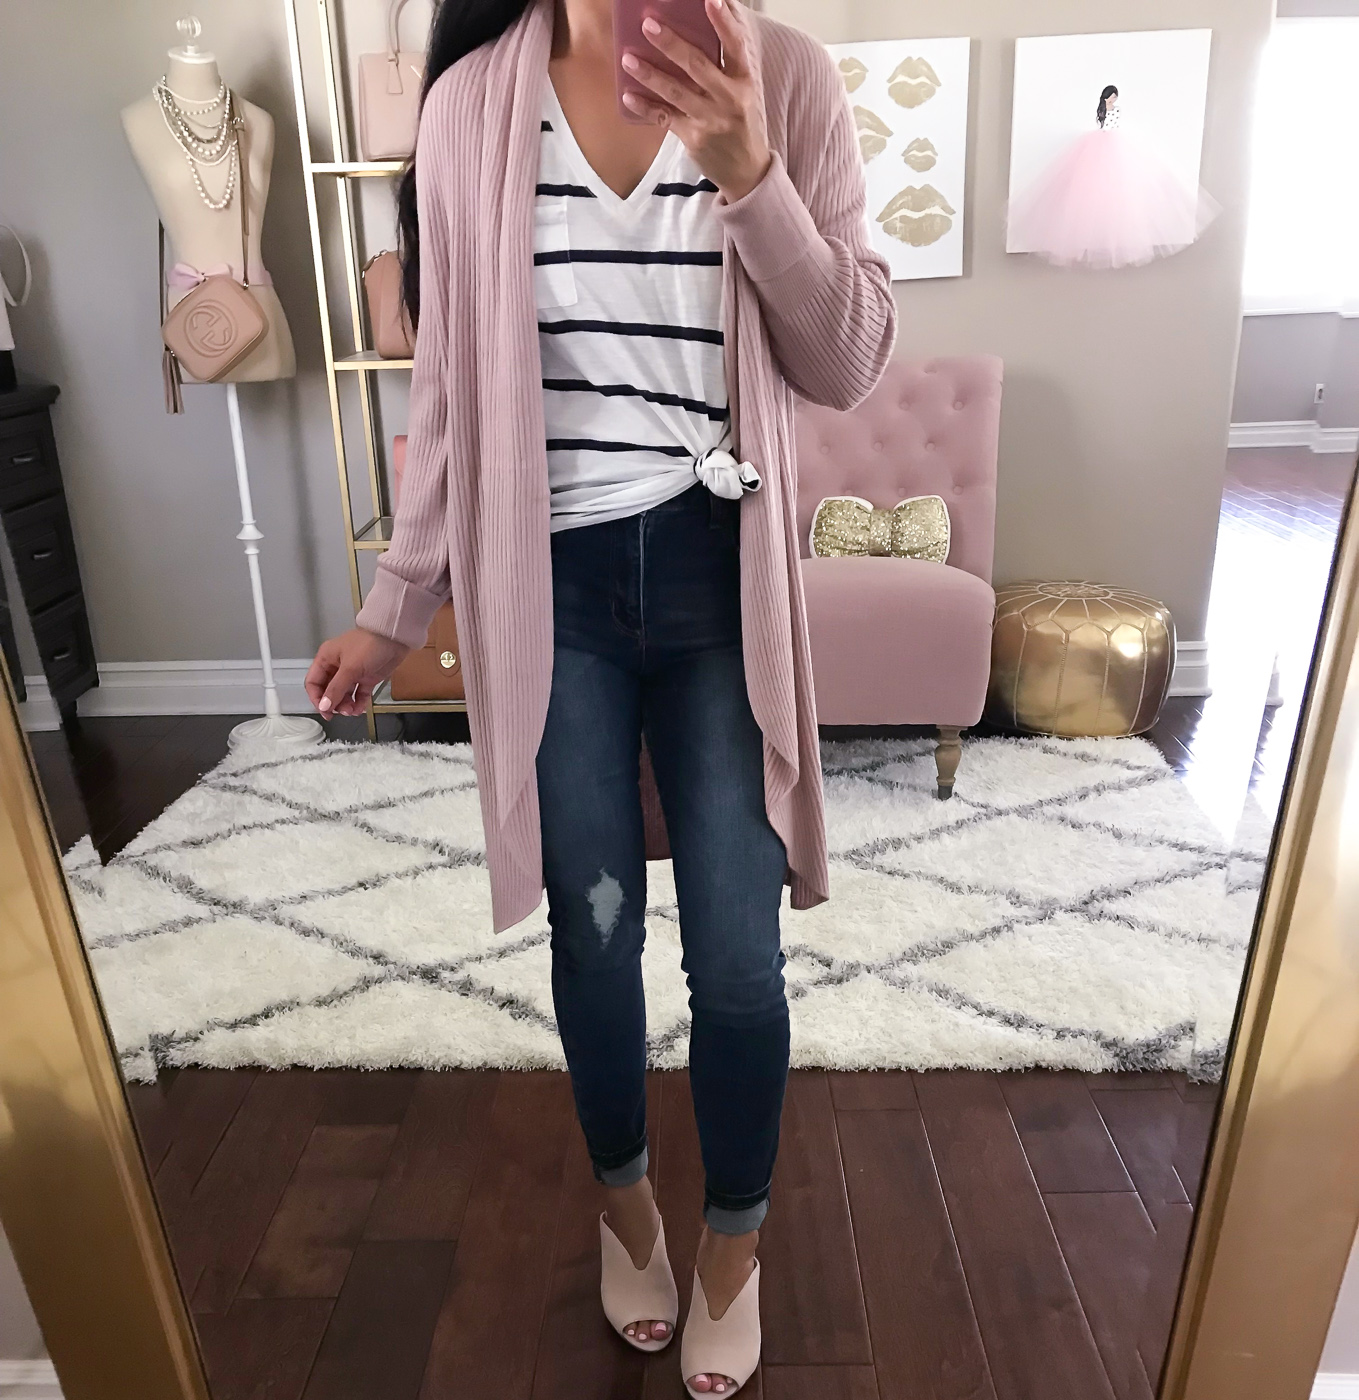 Madewell Outfit + Clare V Leopard Bag - Pretty in Pink Megan